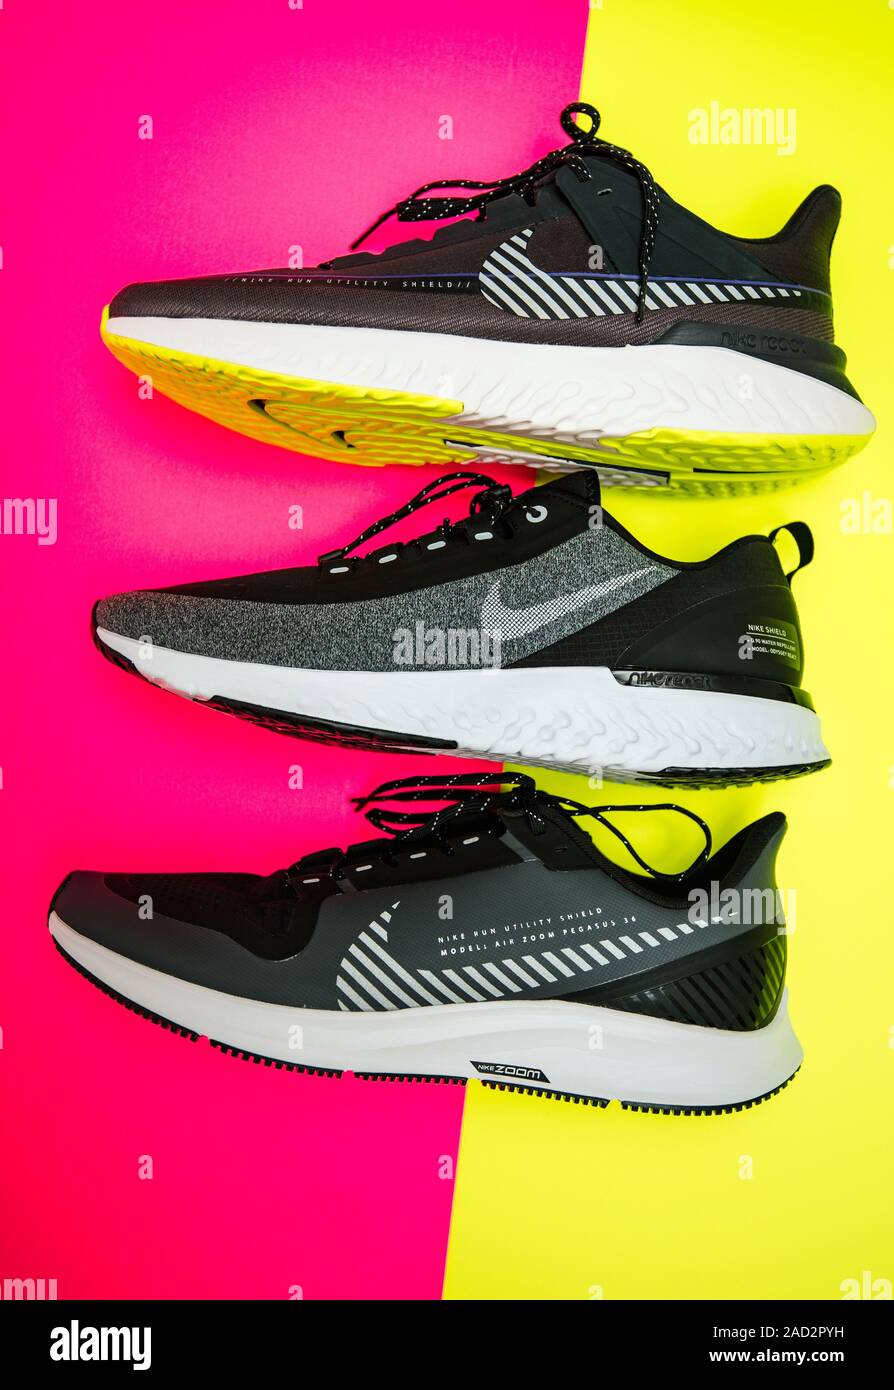 Paris, France - Oct 18 2019: Three new Nike Running shoes with water Shield  protection against cold rain and snow on colorful magenta yellow-green  background Stock Photo - Alamy